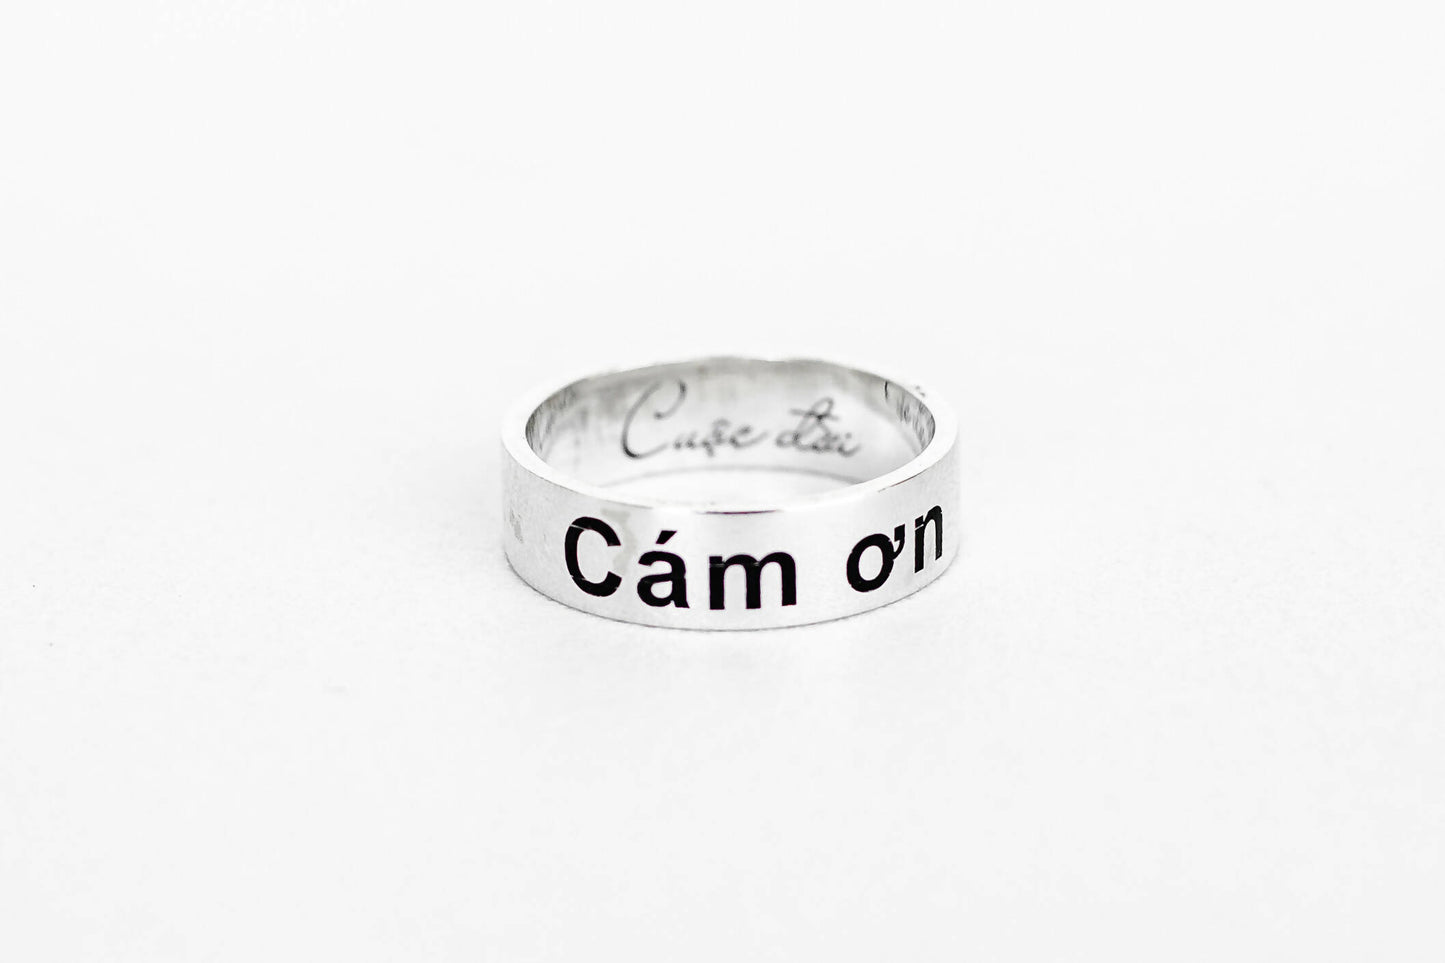 Engraved silver ring "Thank you for life" in Vietnamese , Minimalism ring, Unique designer ring, Handmade silver ring, Sterling silver ring